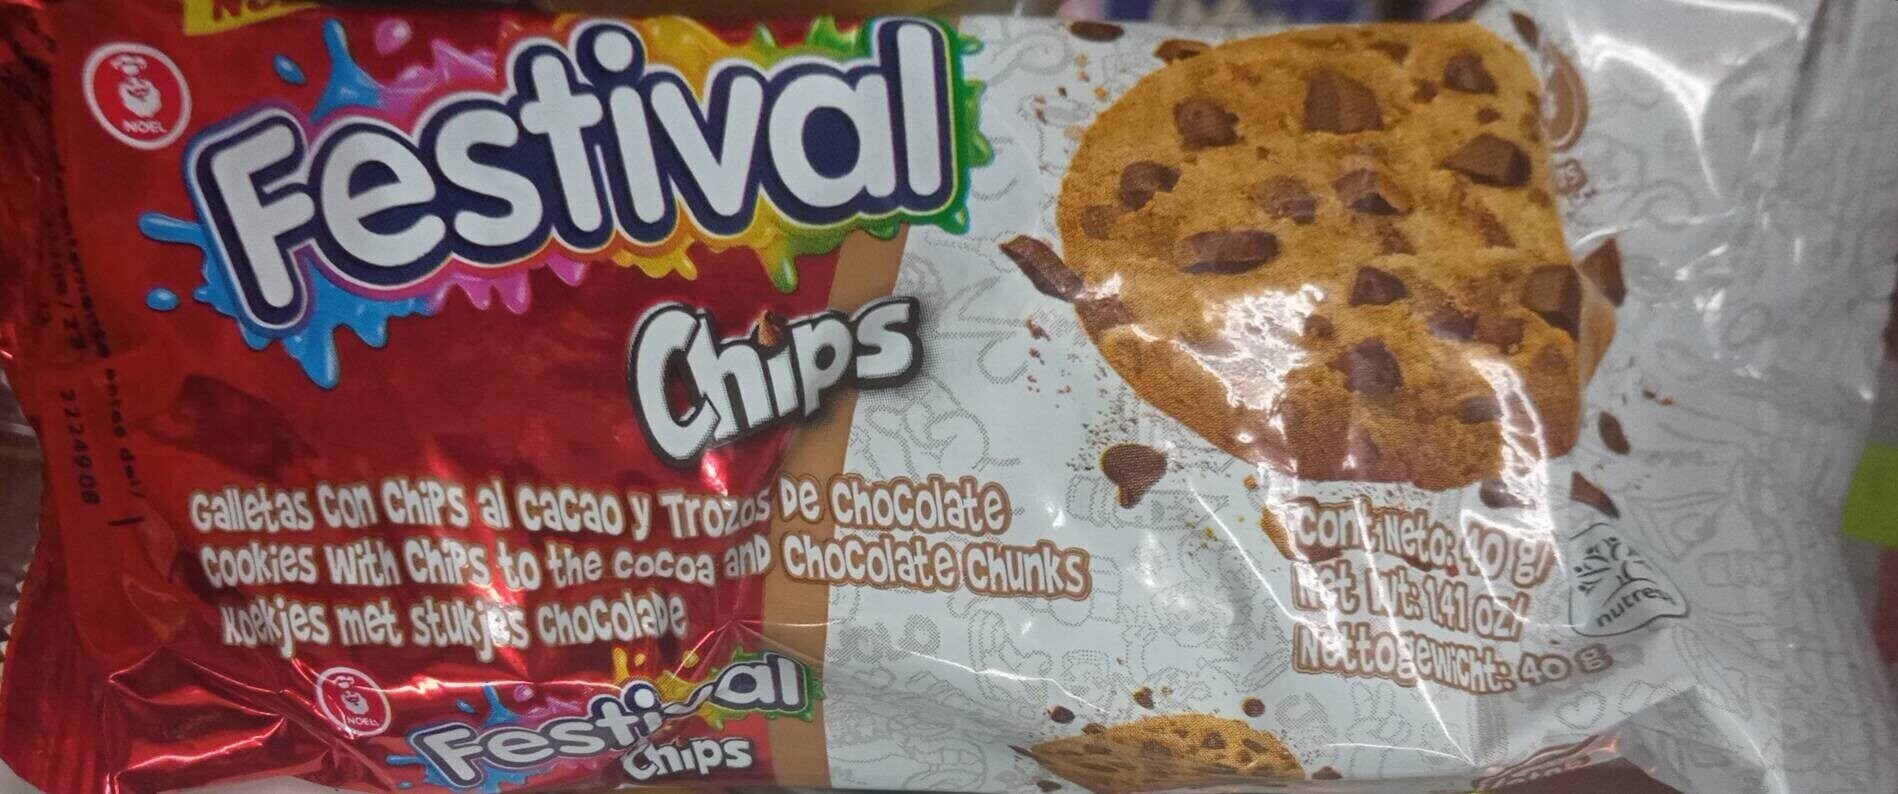 Festival chips - Product - es